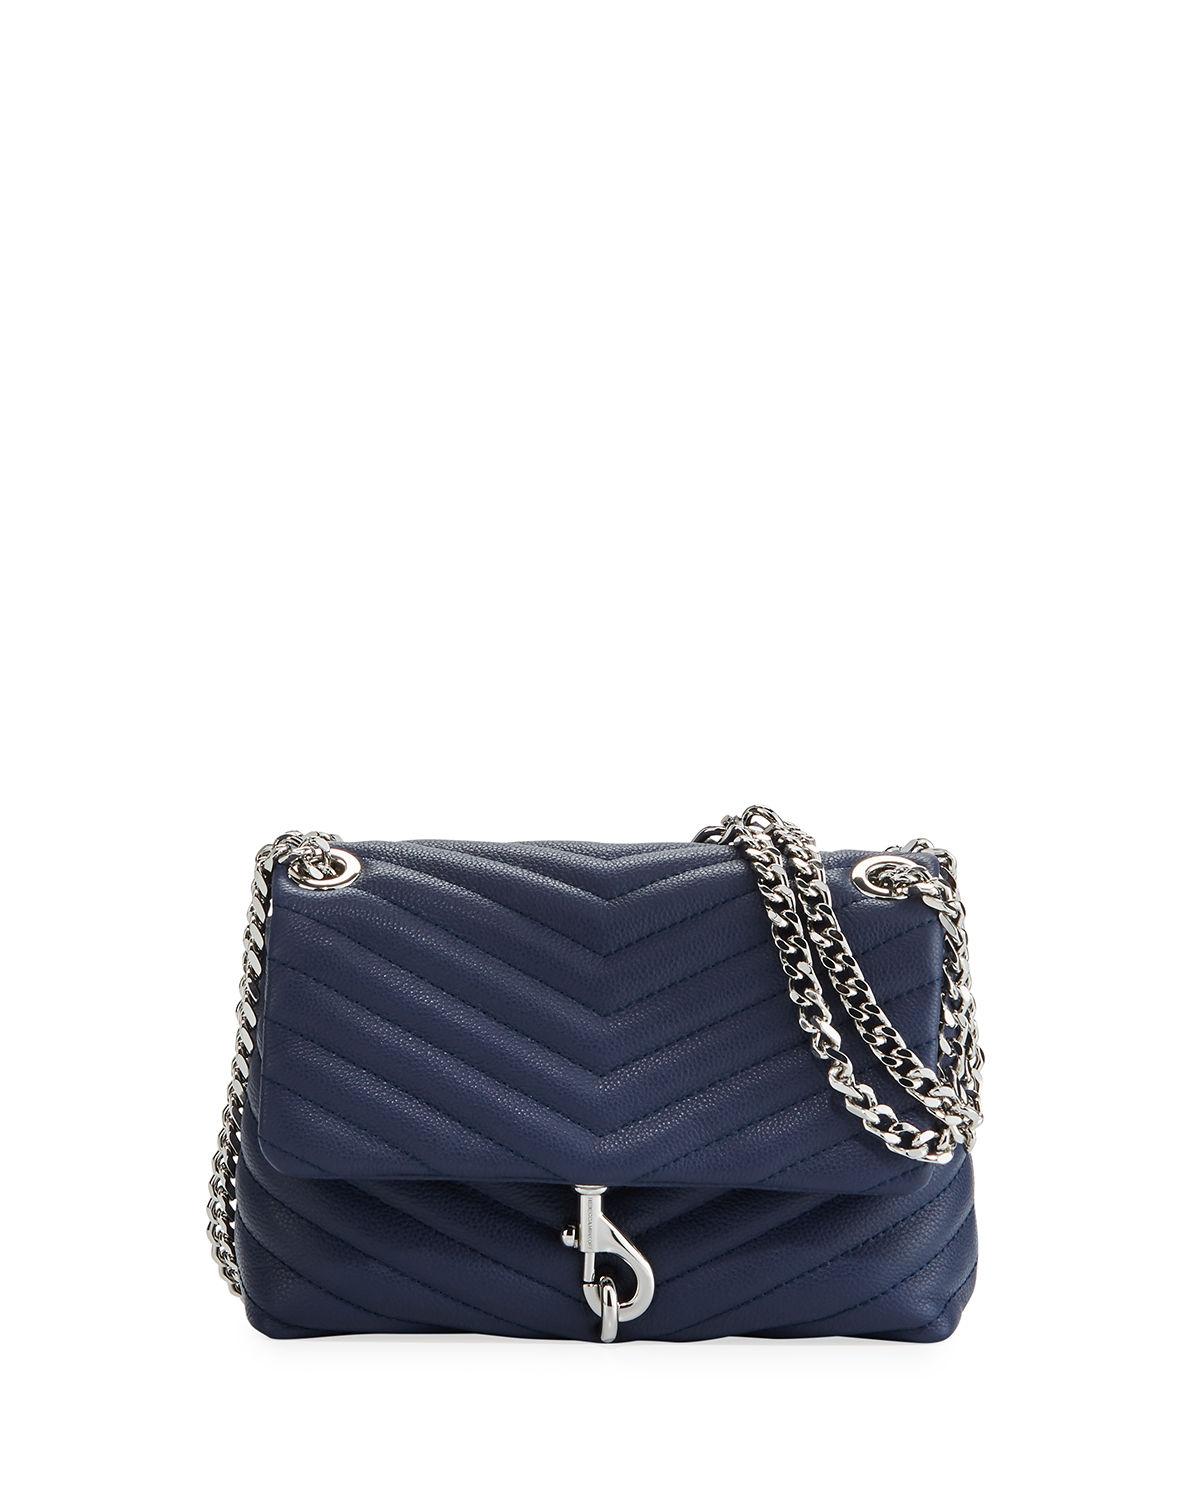 Rebecca Minkoff Edie Quilted Leather Flap Crossbody Bag in Blue - Lyst